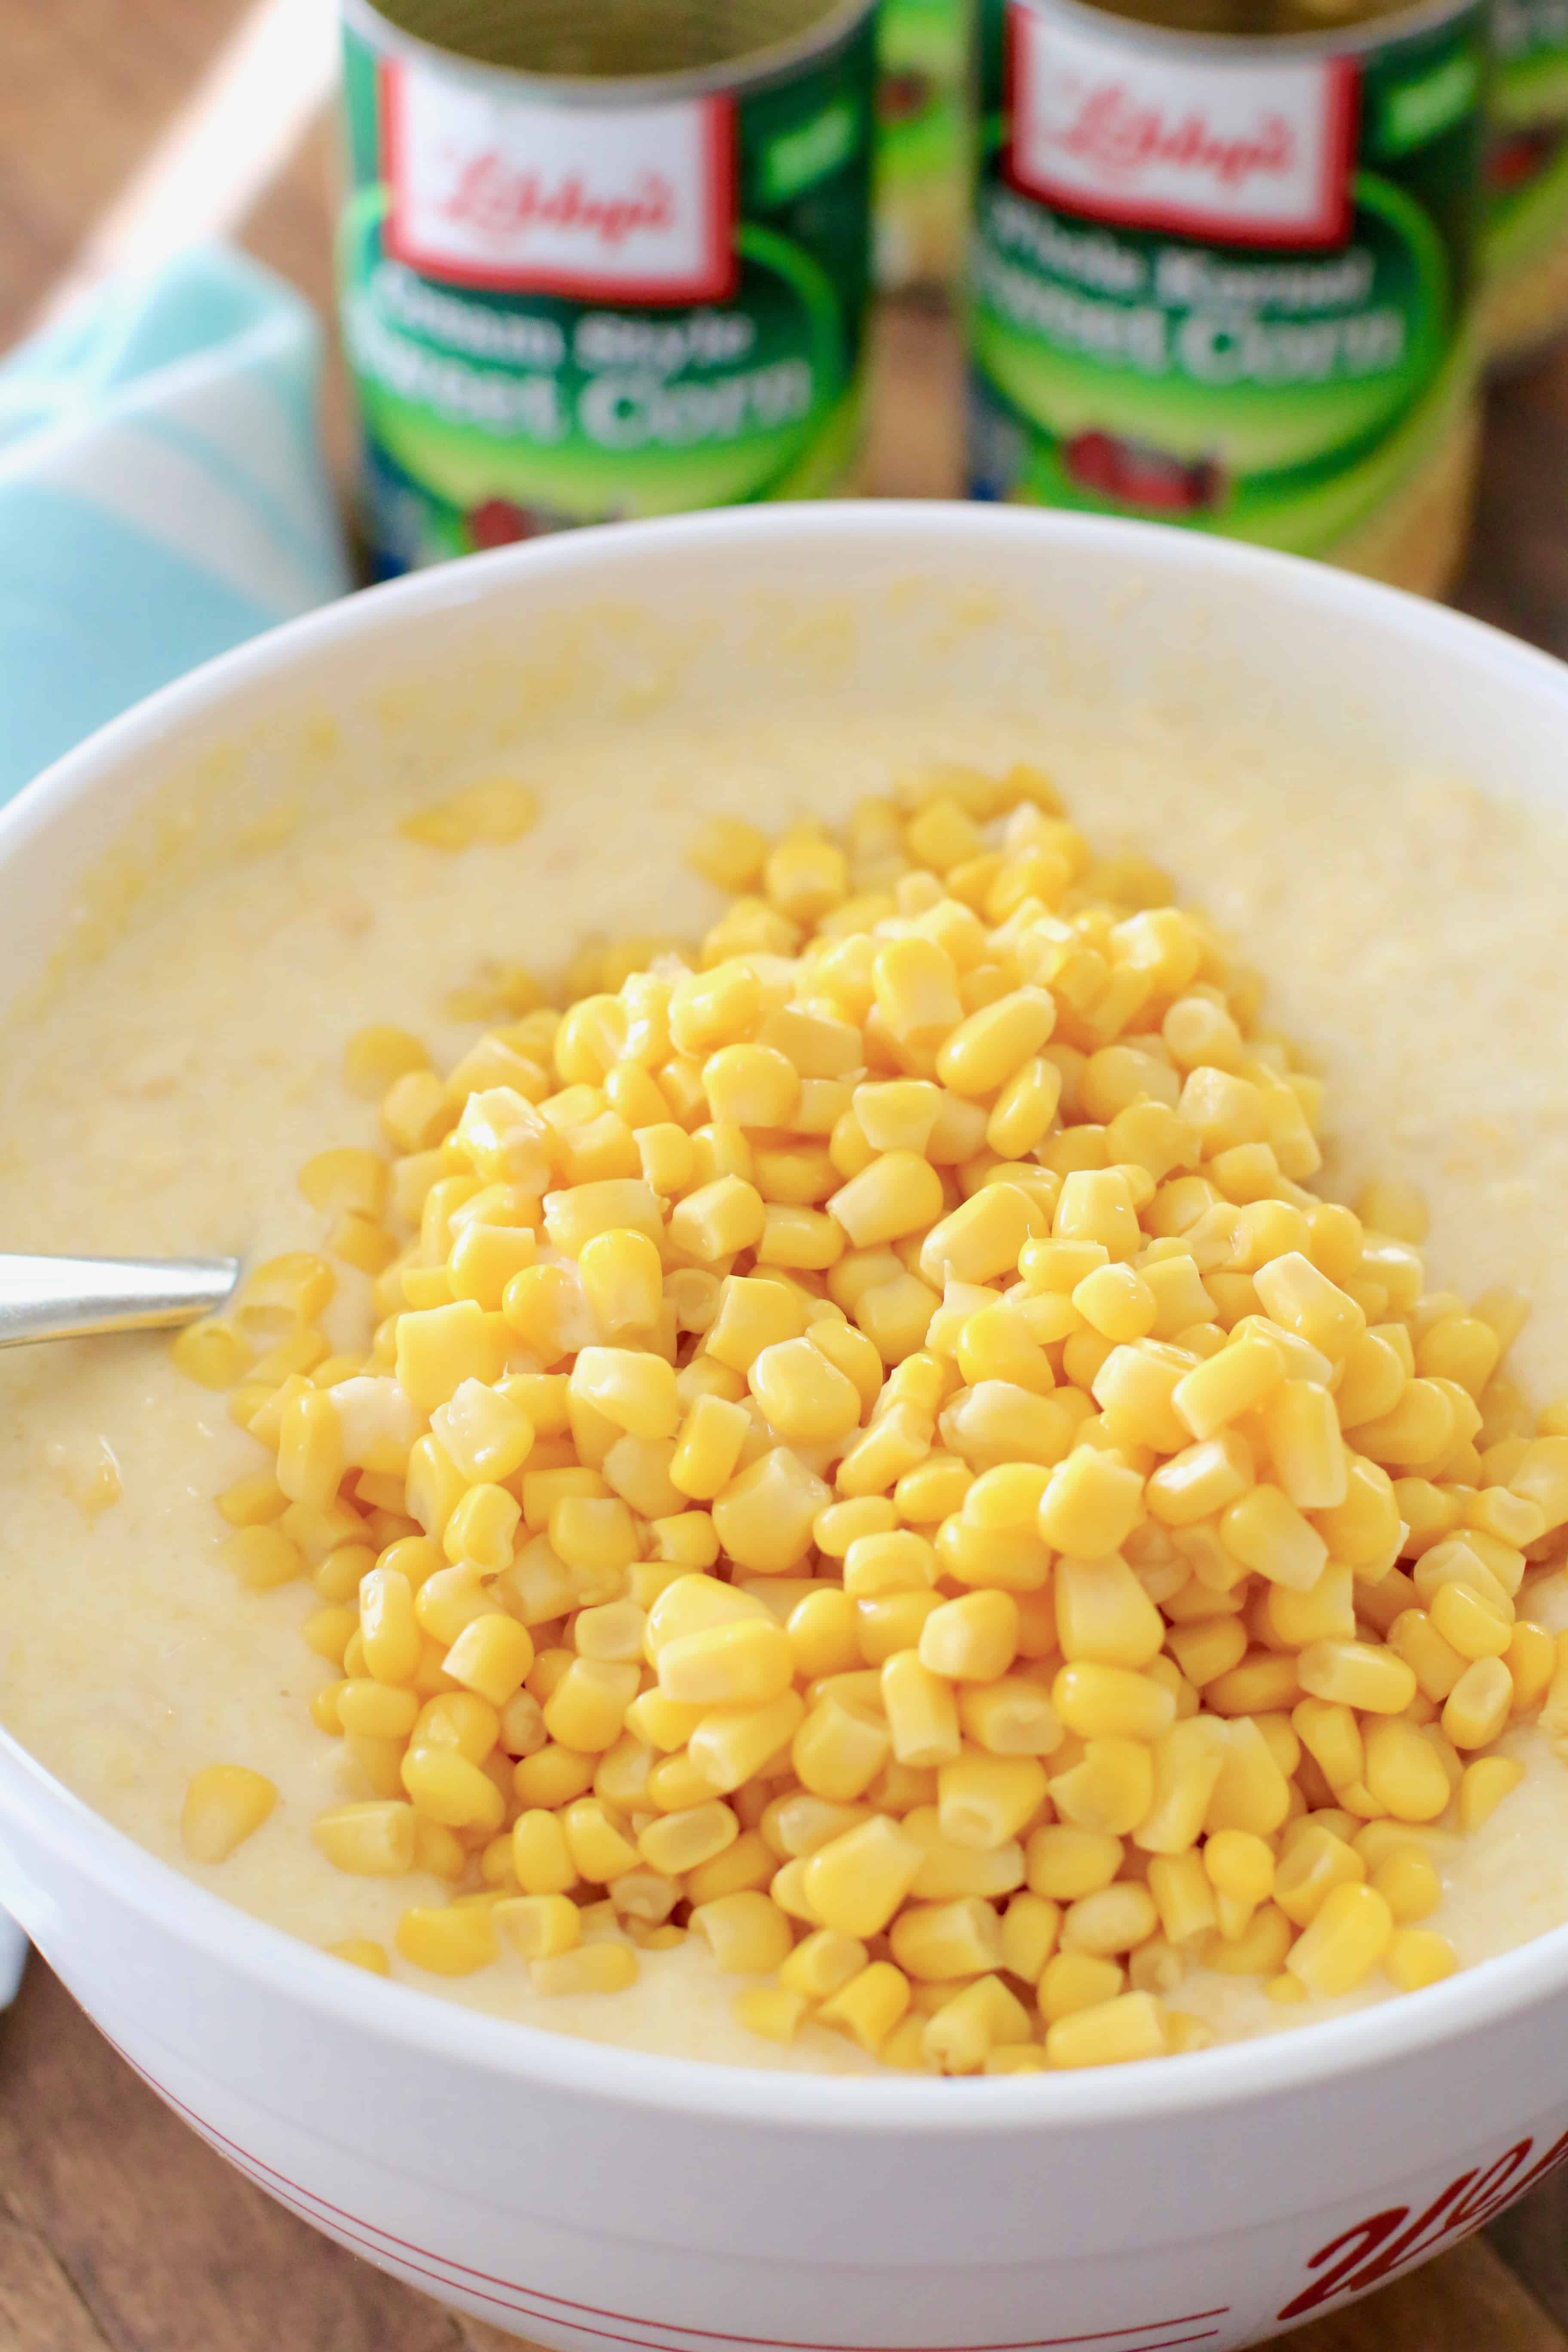 sweet corn casserole batter with canned corn down in a white mixing bowl with cans of corn in the background.